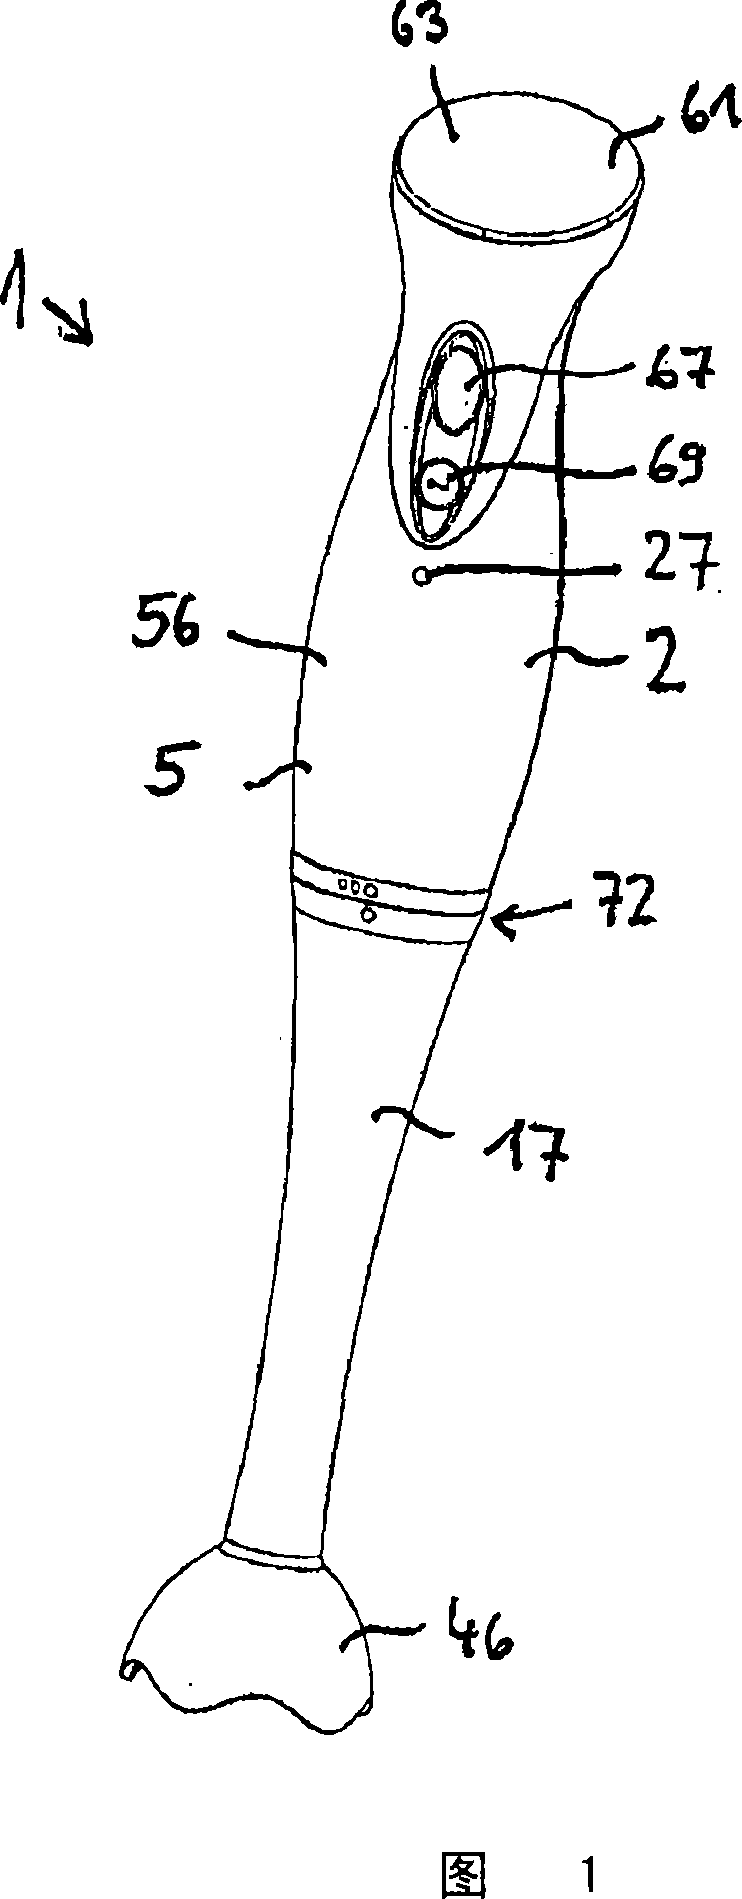 Electric-motor kitchen appliance comprising an electric or electronic control